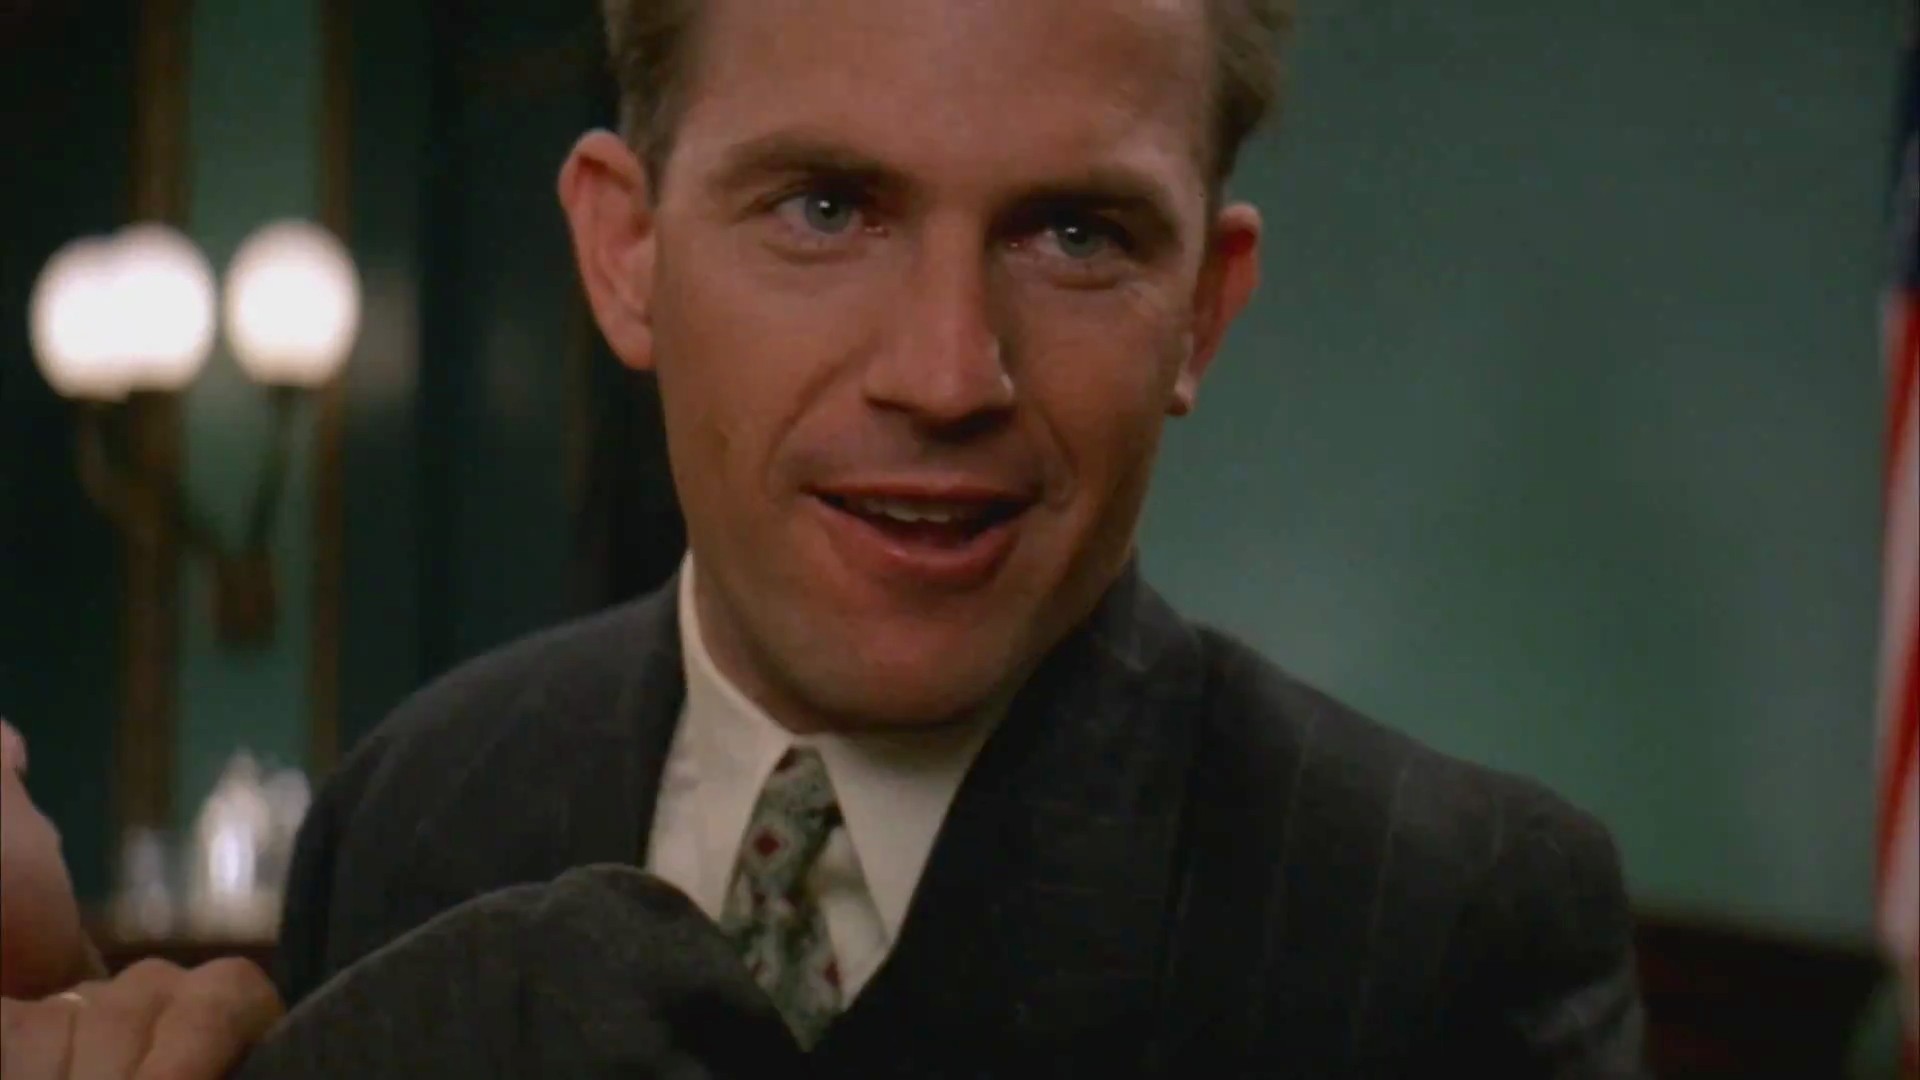 Photo of Kevin Costner, portraying Eliot Ness in "The Untouchables"(1987). Source: The Official Trailer